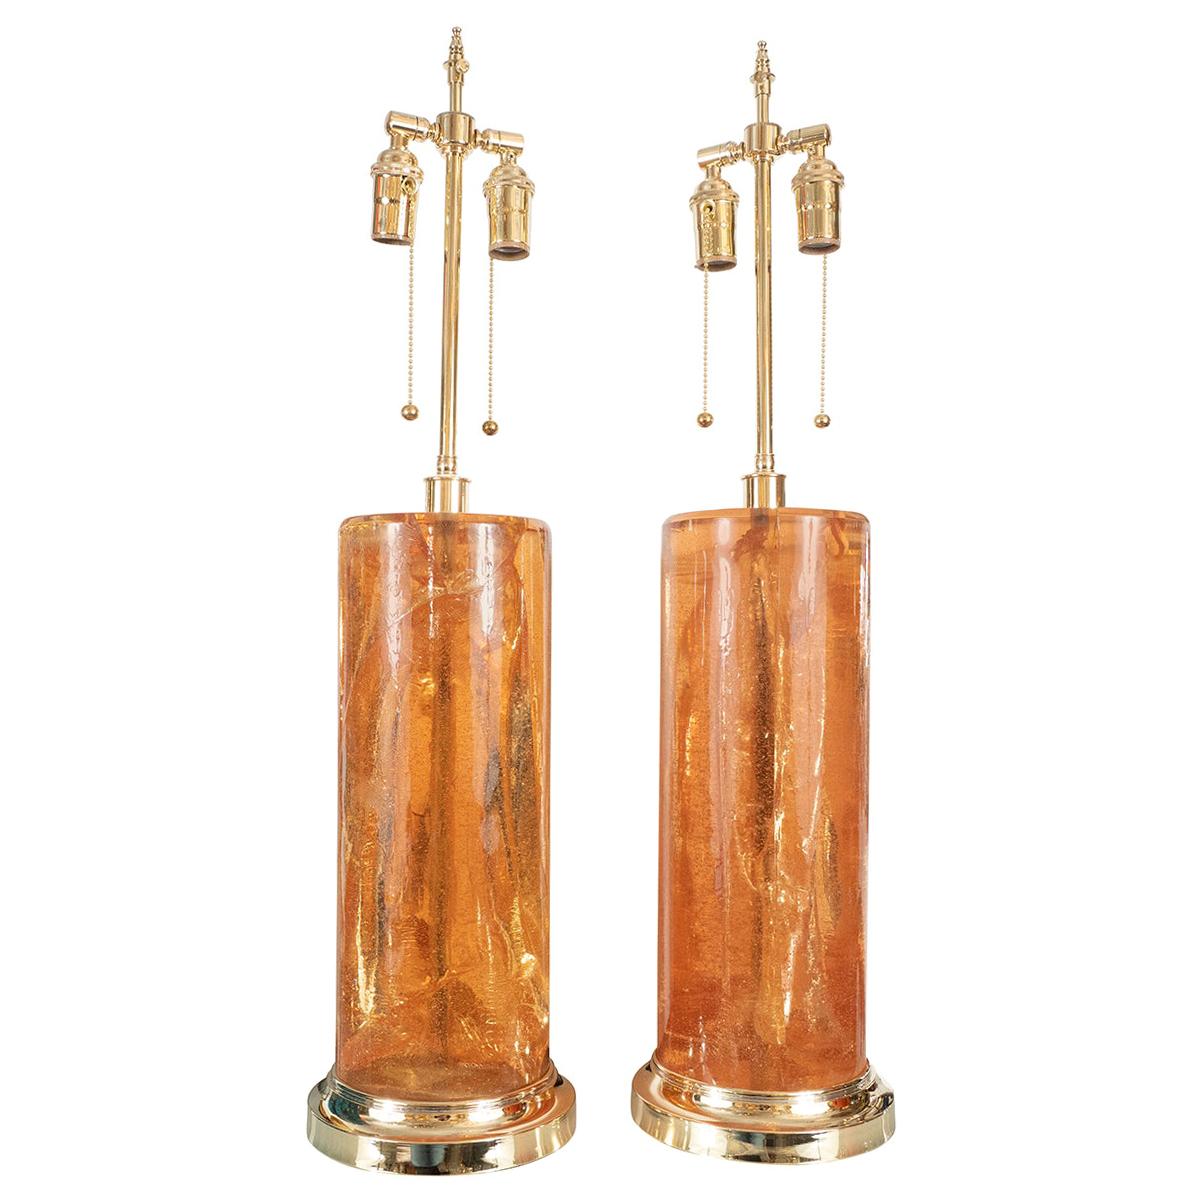 Pair of Fractured Resin Table Lamps